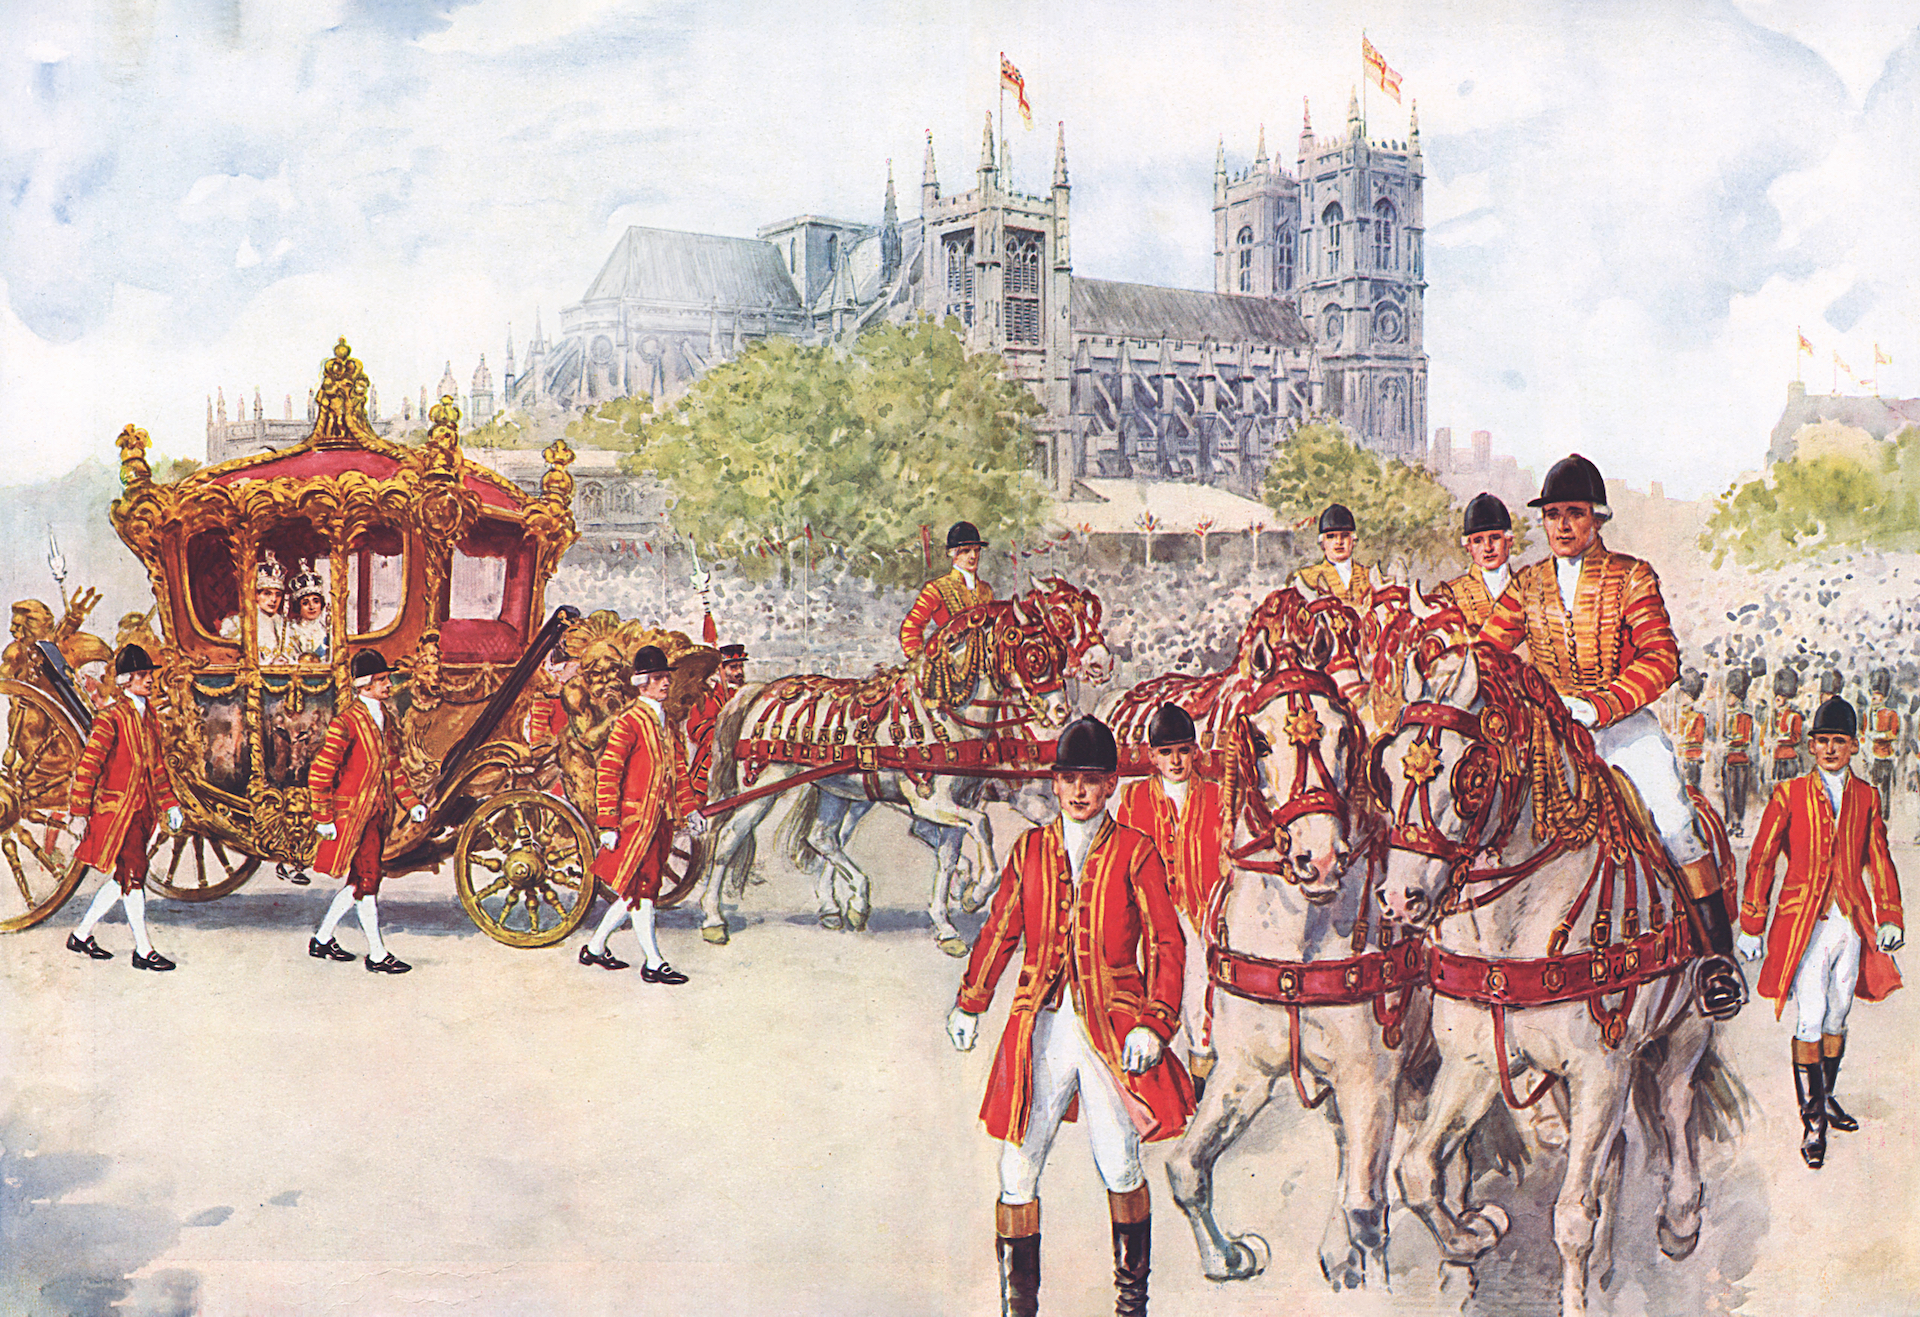 Illustration specially drawn by C.E Brock for The SPHERE Coronation, May 1937